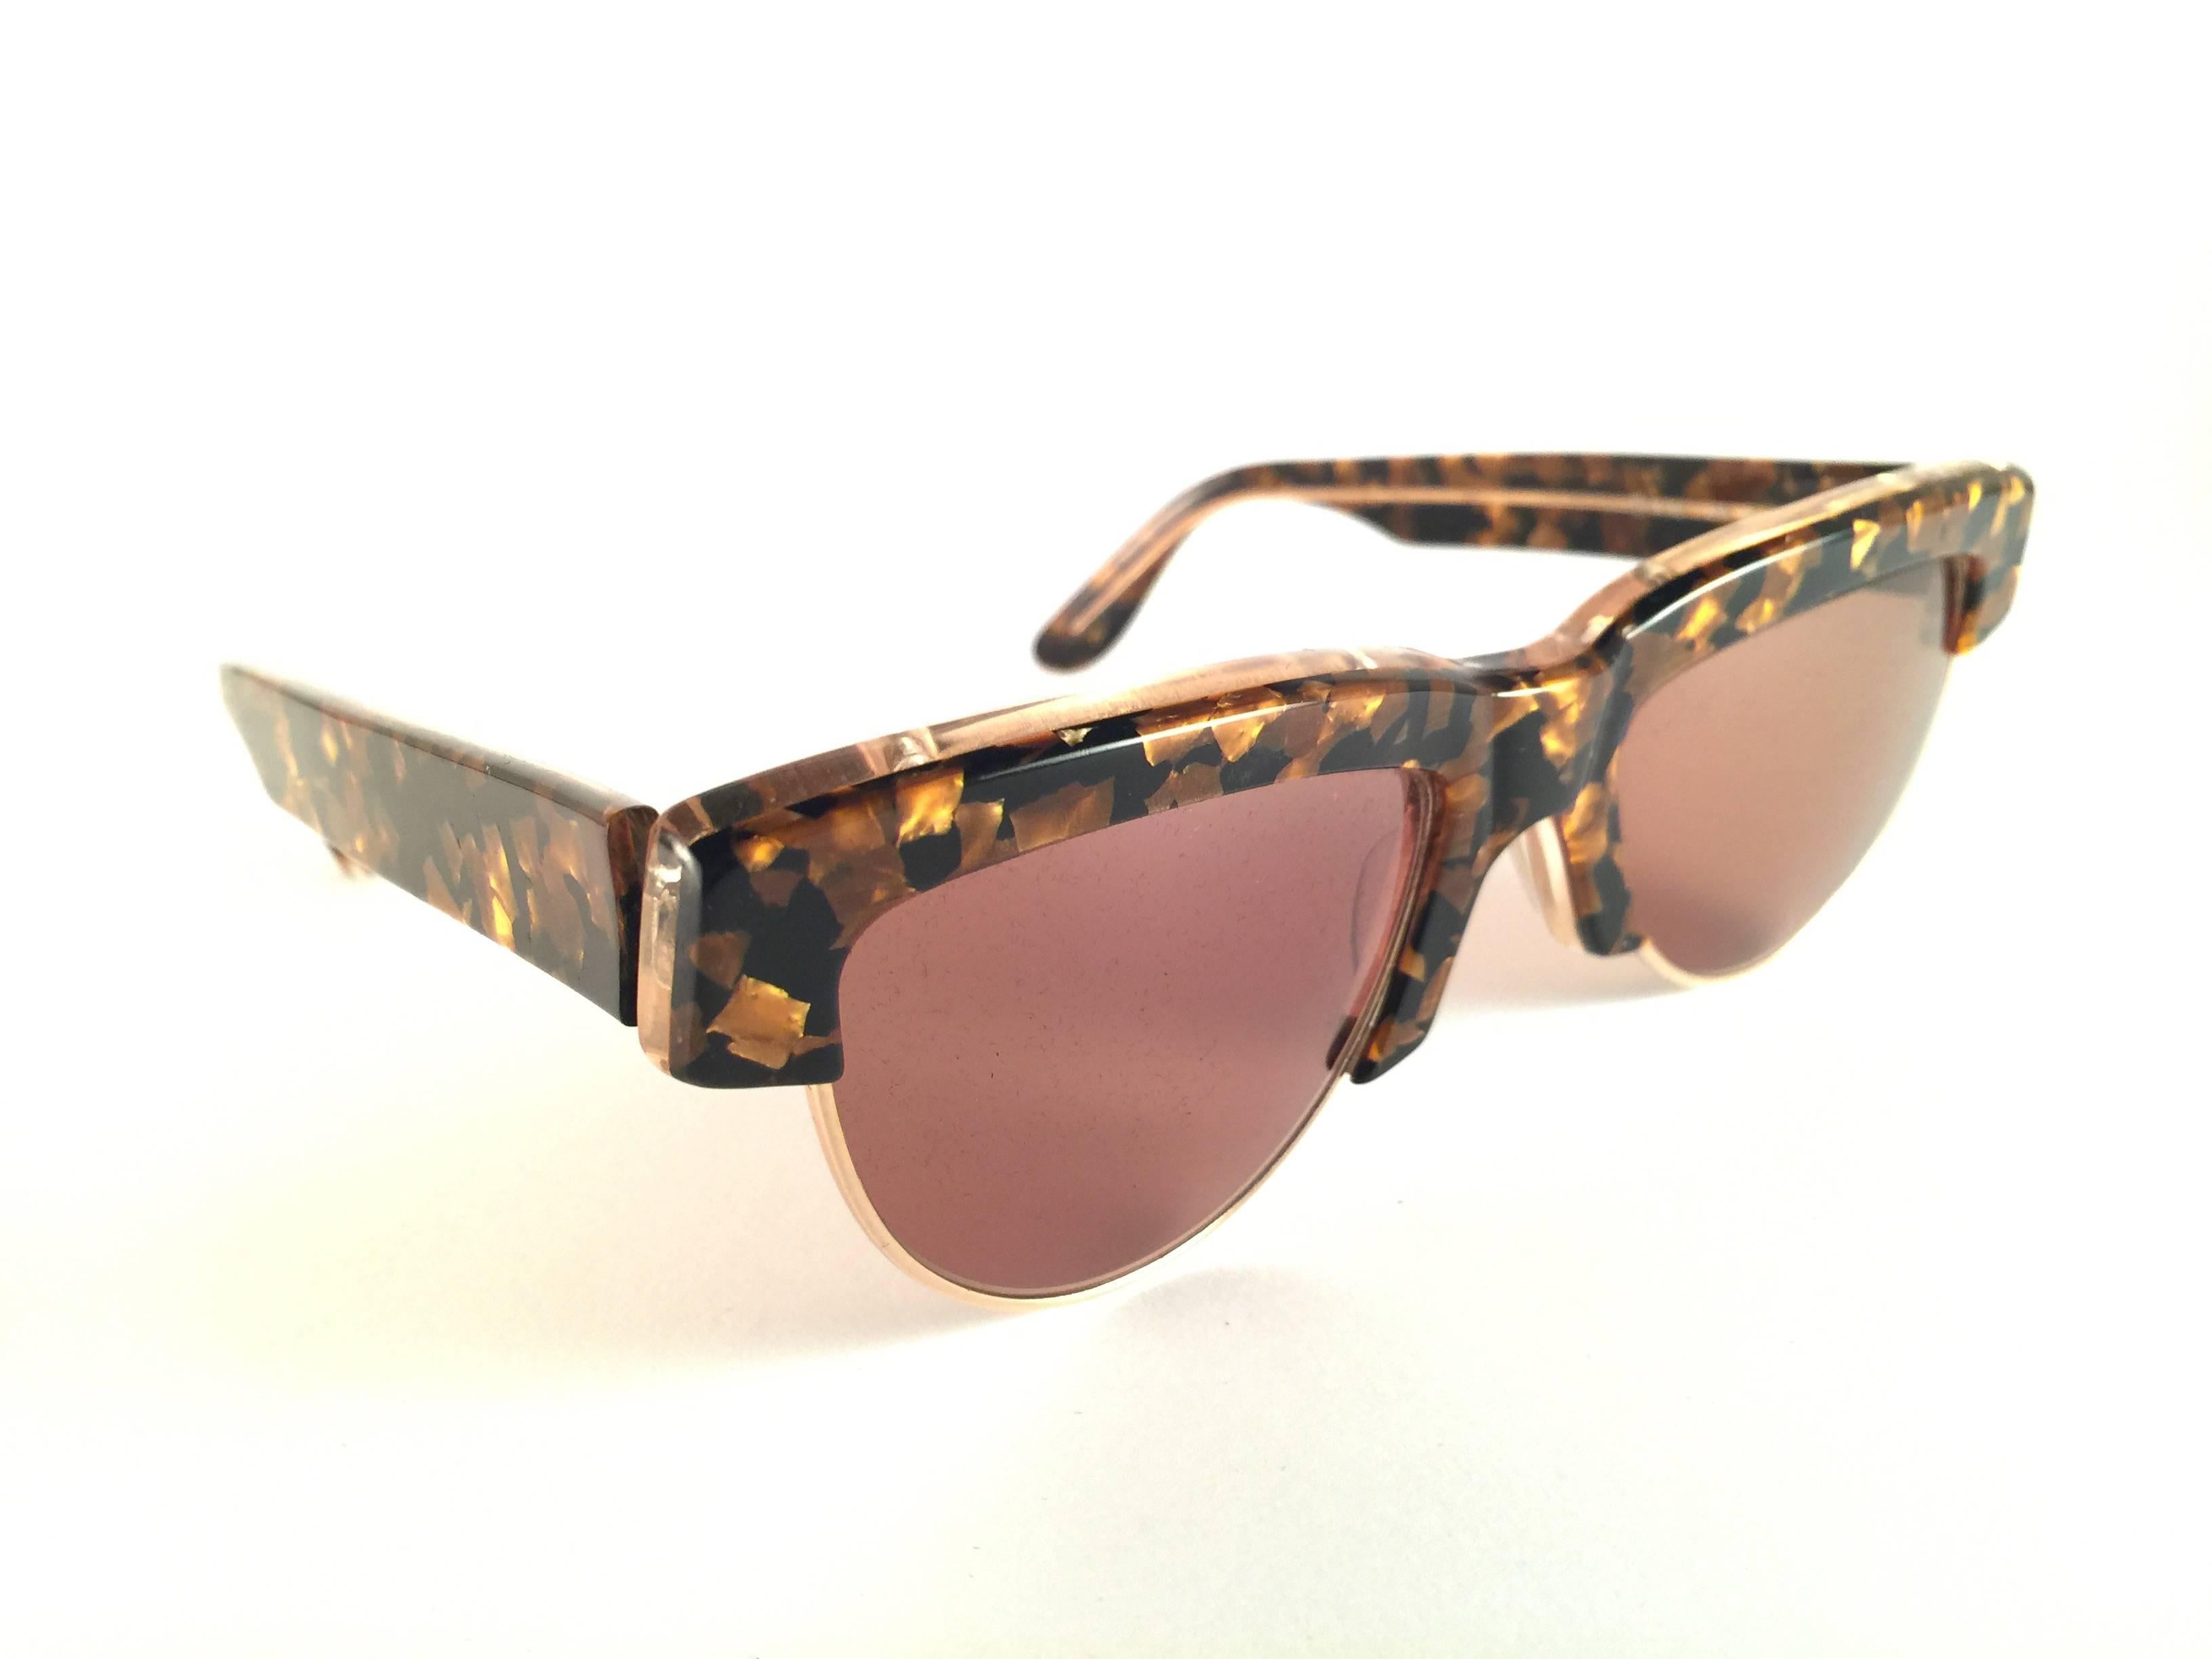 New Vintage Alain Mikli in Tortoise with gold accents frame.

Rare item in new and unworn condition. Spotless brown lenses.

Please consider that this item is nearly 40 years old so it could show minor sign of wear due to storage.

Made in France.